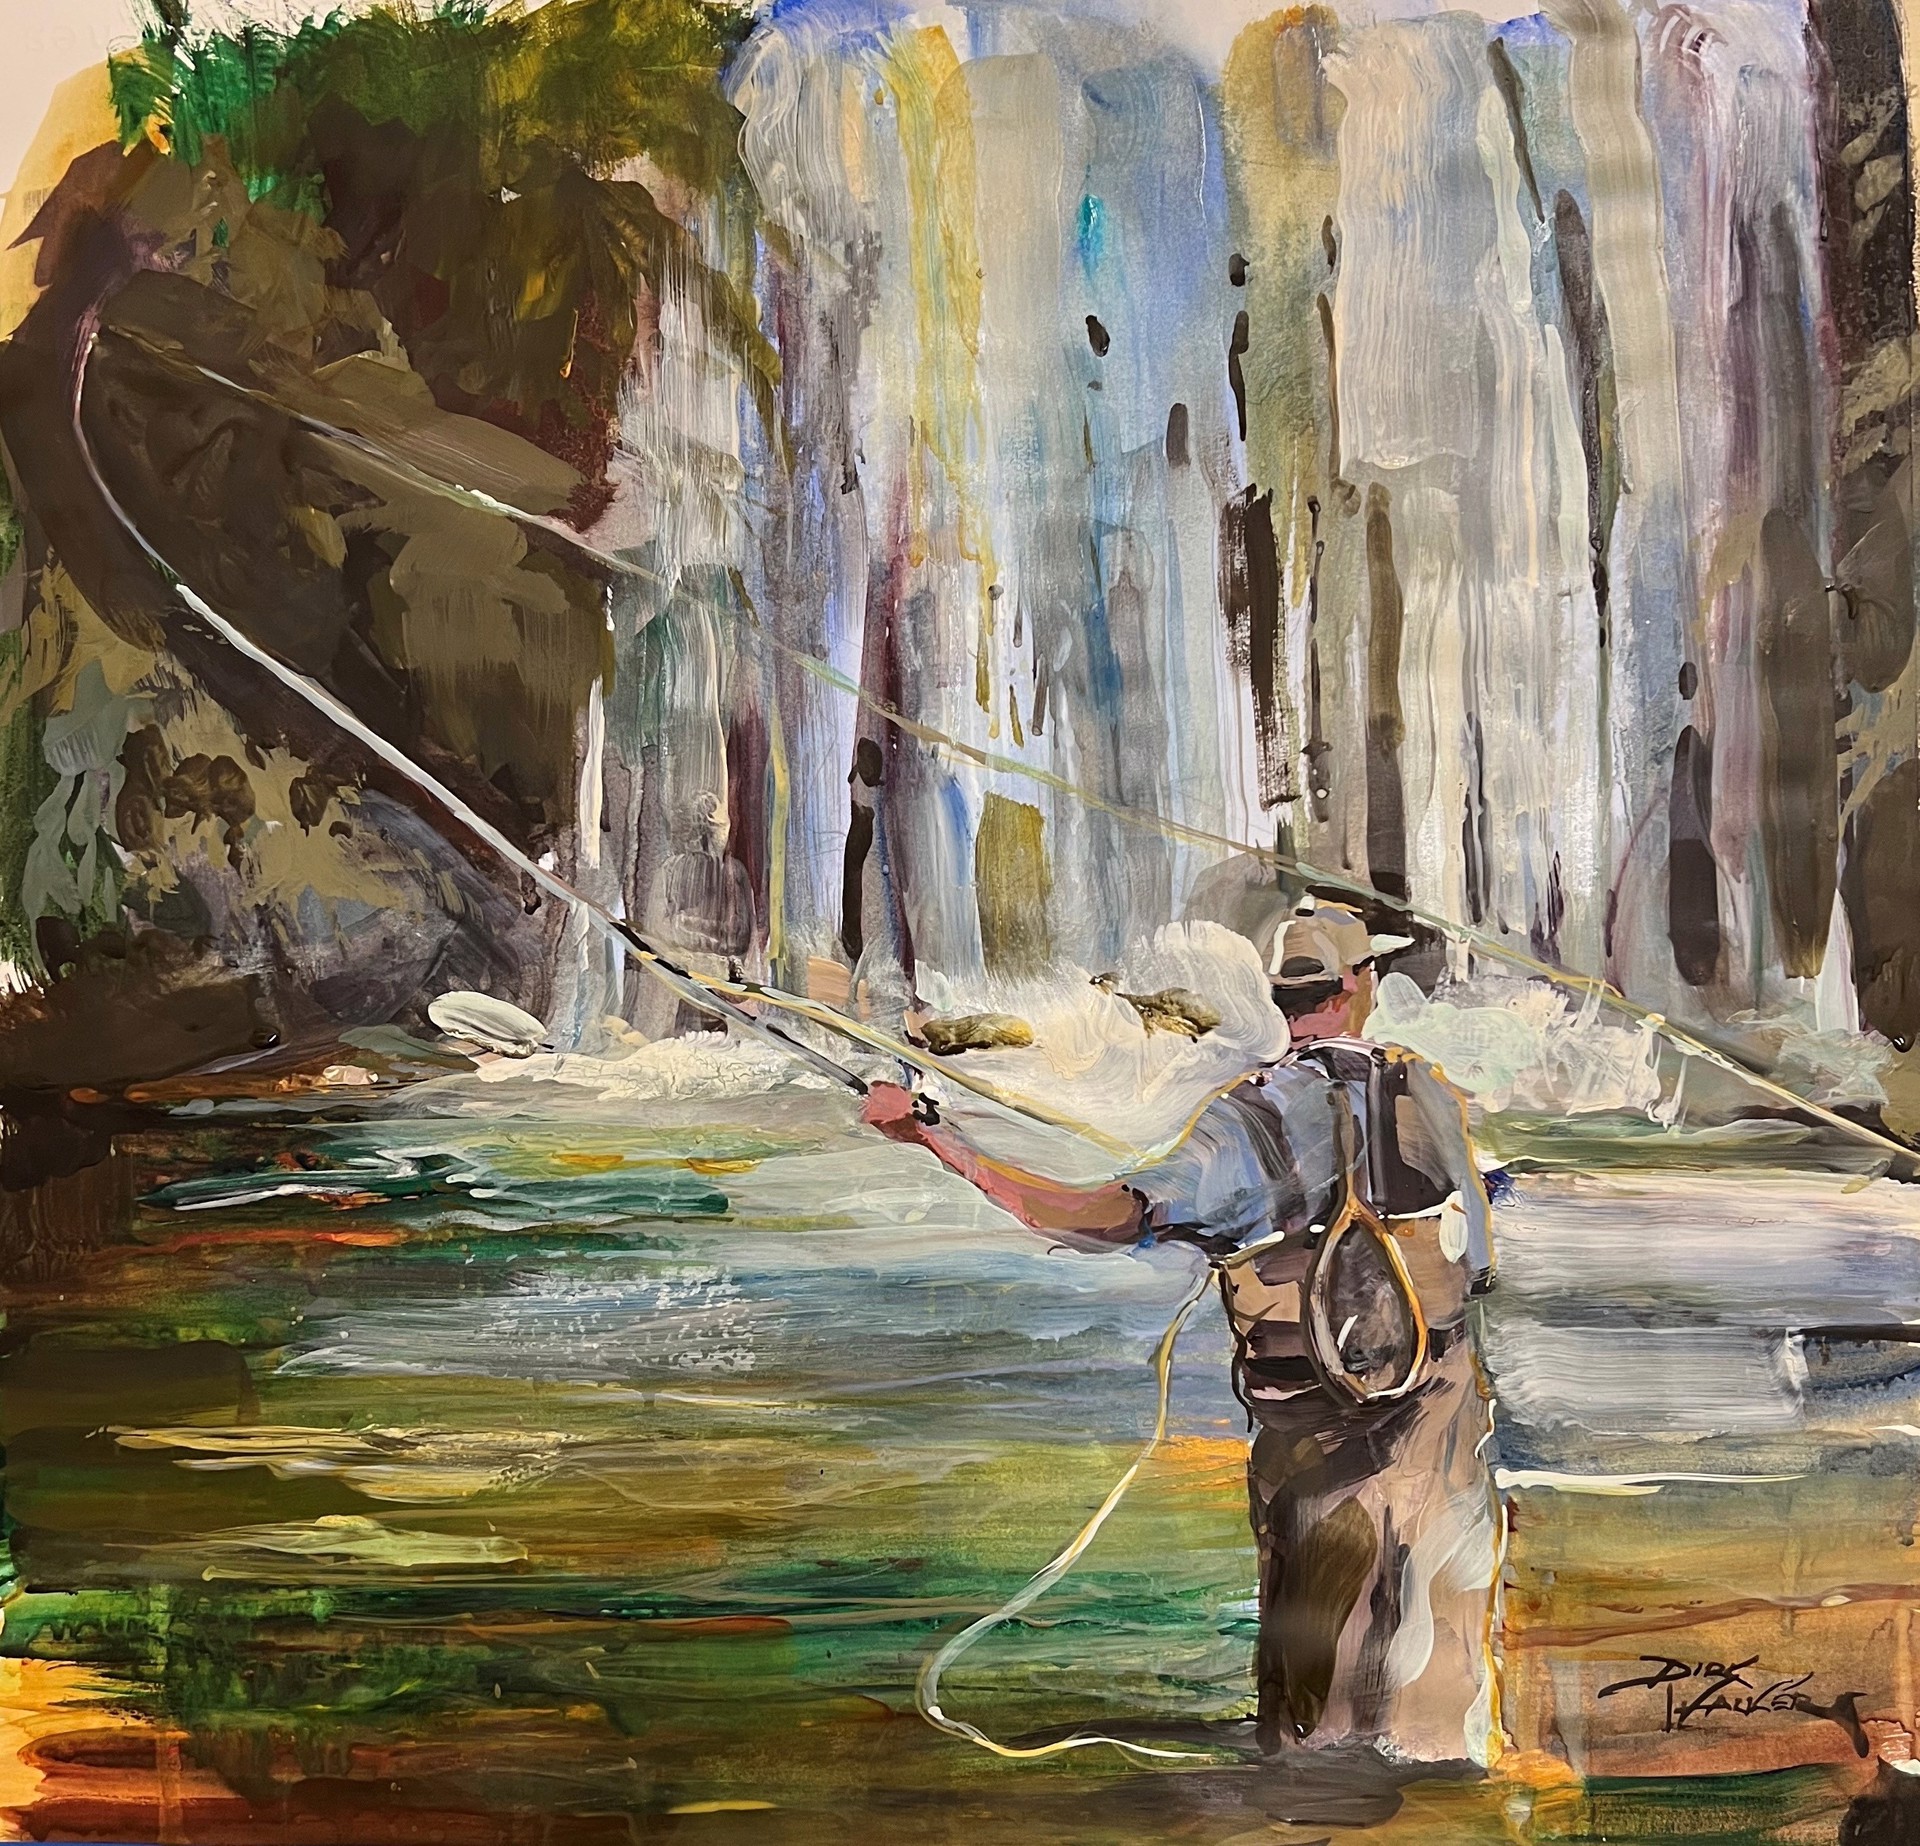 “Working the Falls of Cashiers“ Fly Fishing by Dirk Walker